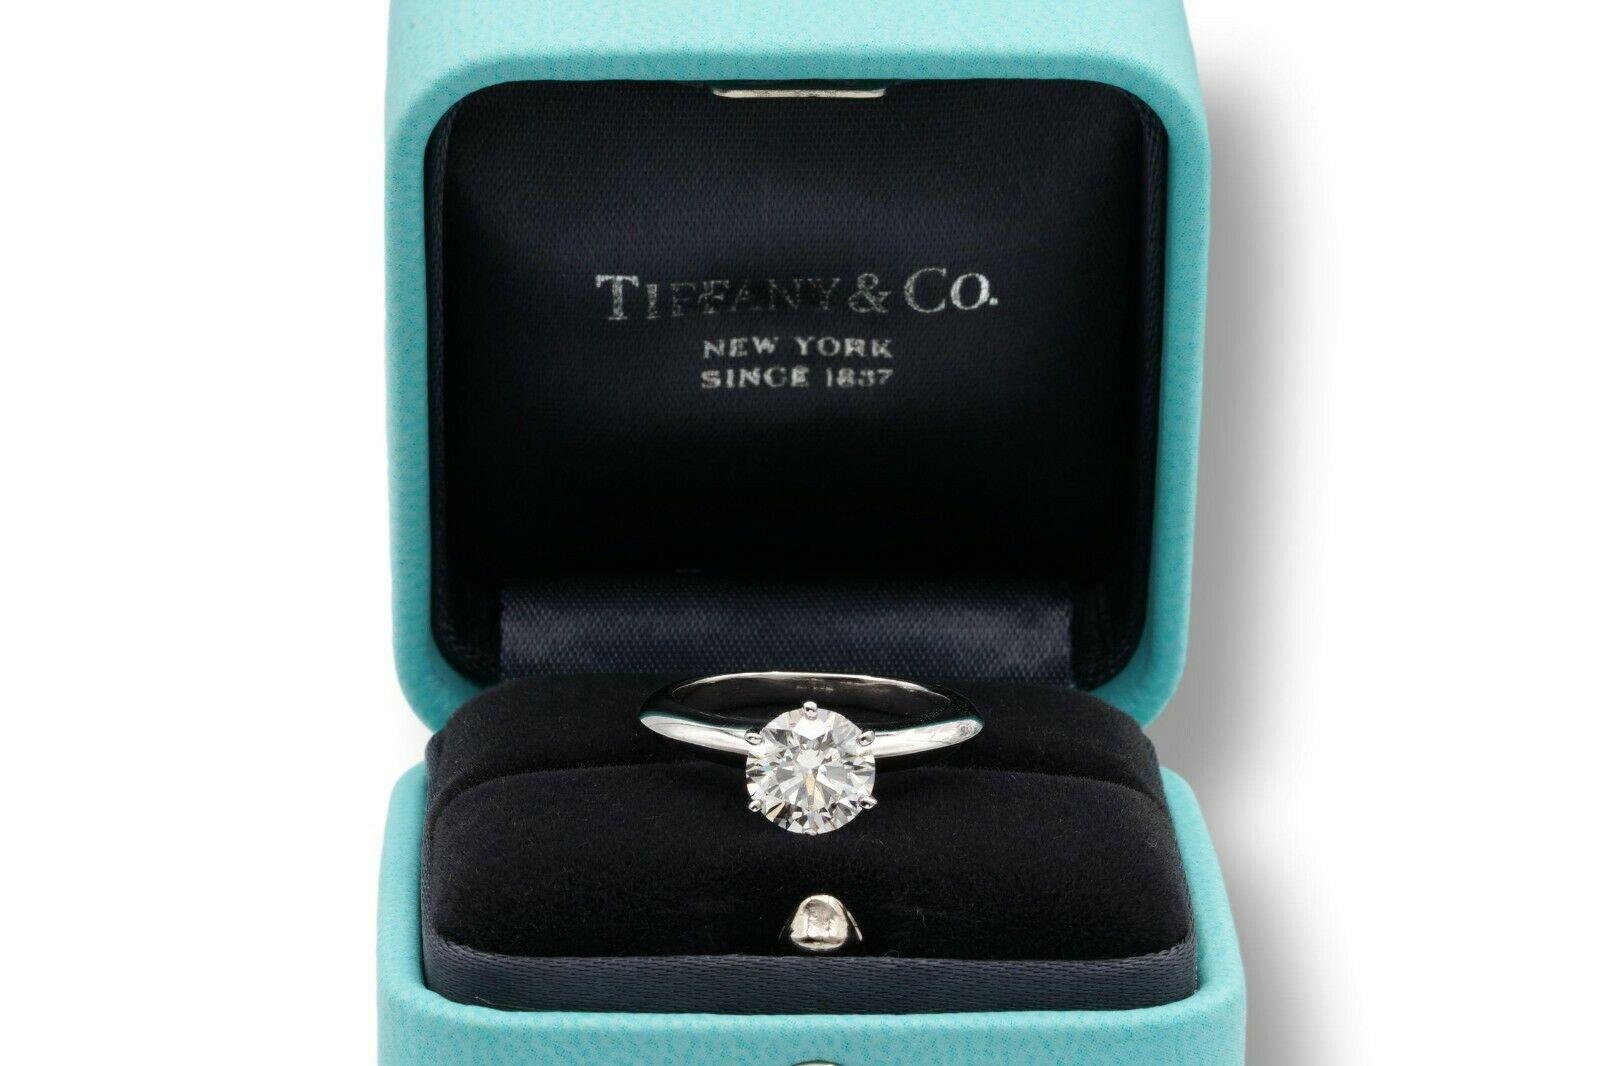 For remaining balance of $7,400 on this ring for Florian. To be paid Friday 7/23. Total $14,800.

Tiffany & Co Round Brilliant Classic Solitaire Engagement Ring featuring a 1.36 ct Center G color, VS1 clarity, finely crafted in a 6 prong Platinum